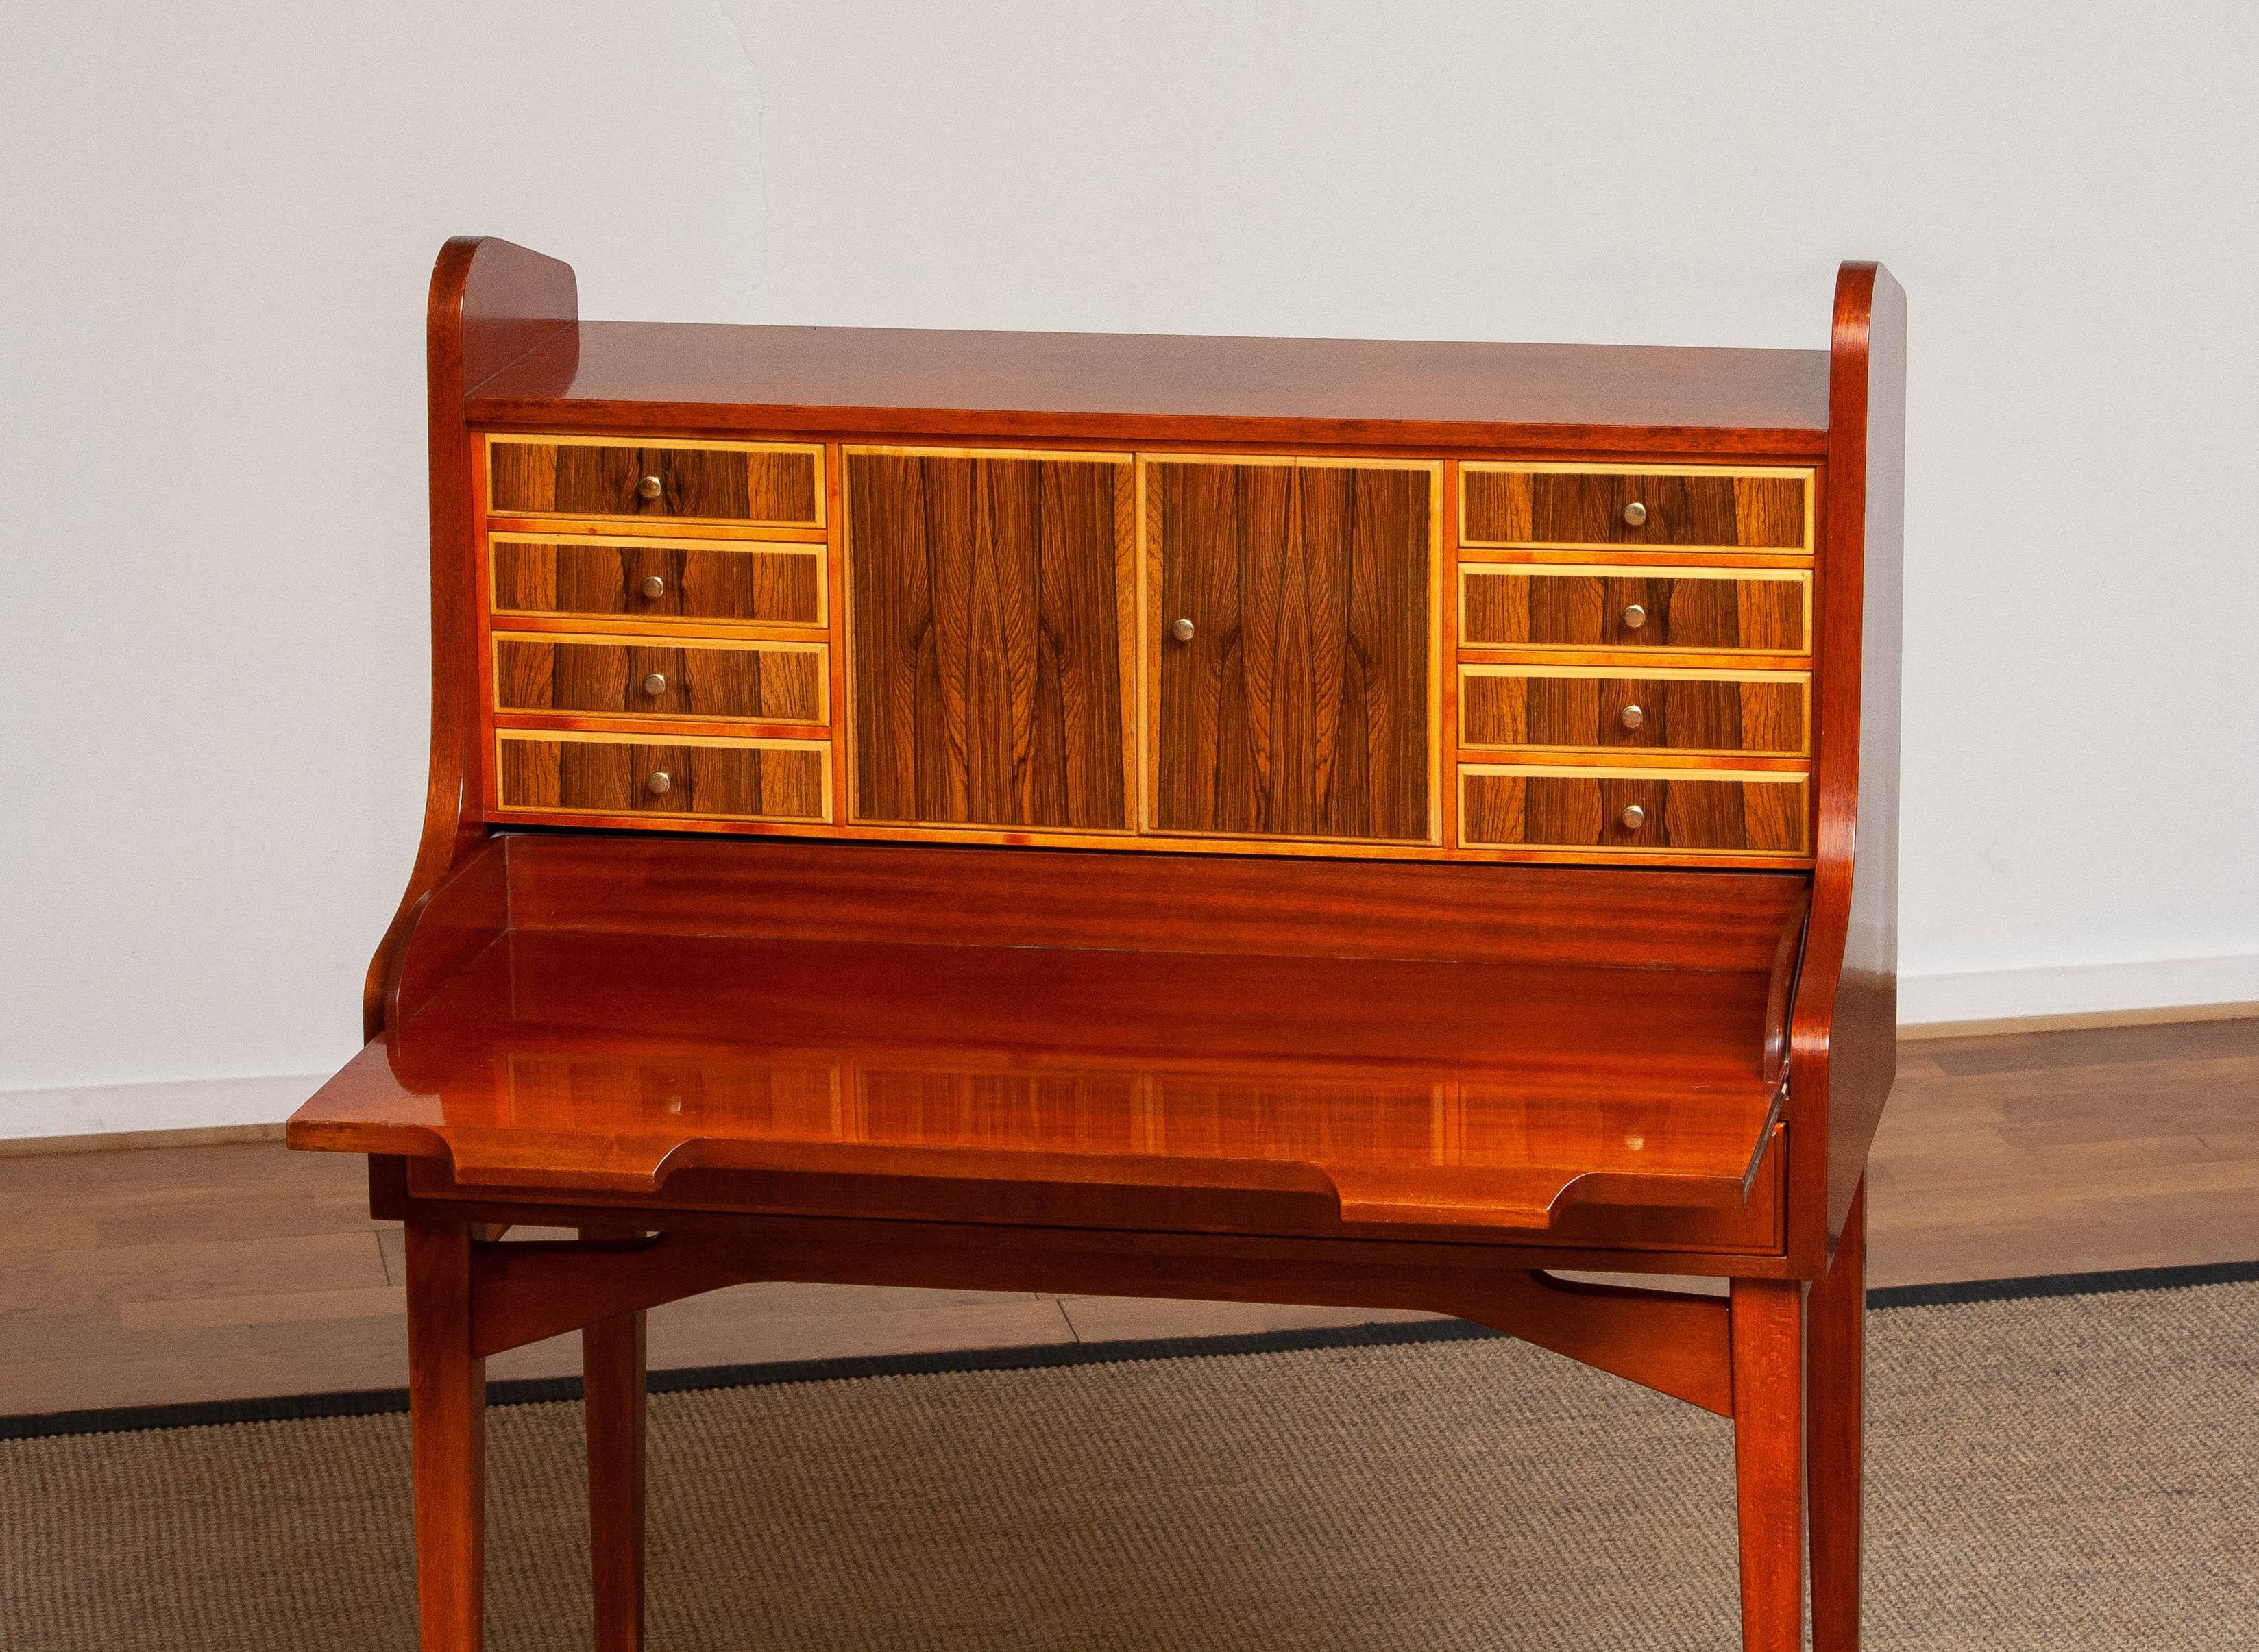 '60s Slim Leg Secrétaire / Vanity with Inlay of Elm and Walnut, Sweden For Sale 1